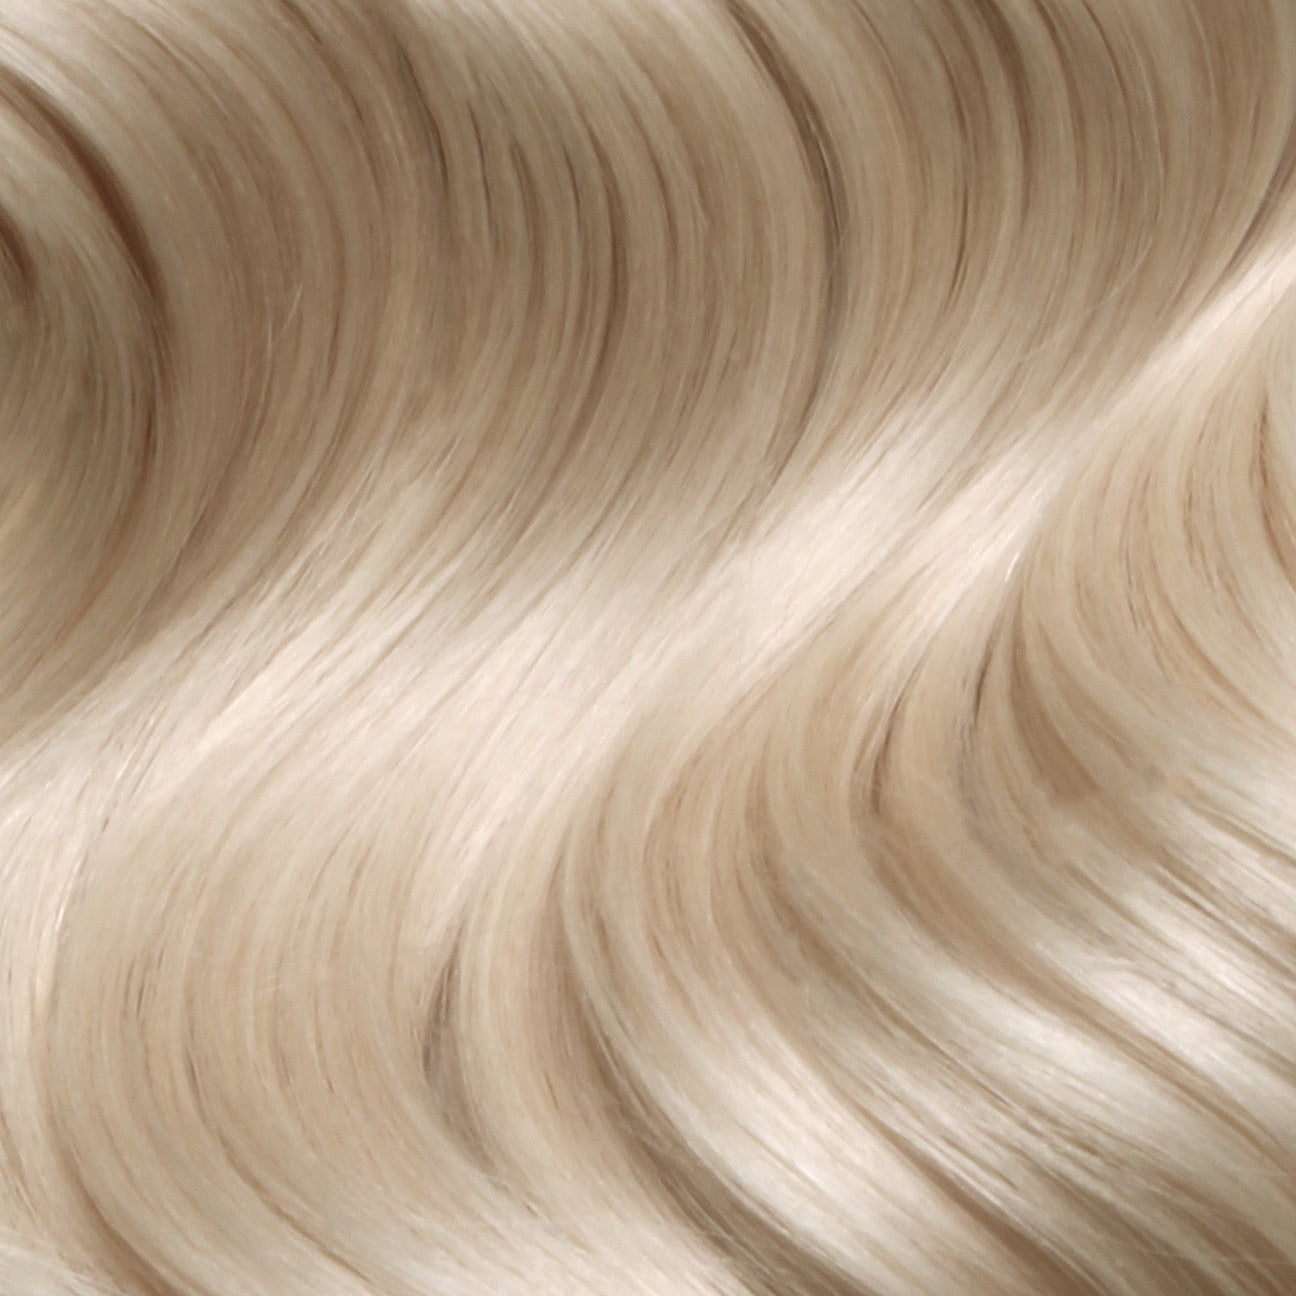 Nano Bonds 18 Inches - SWAY Hair Extensions Pure-Platinum-60A Ultra-fine, invisible bonds for a flawless, natural look. 100% Remy Human hair, lightweight and versatile. Reusable and perfect for individual or salon use.